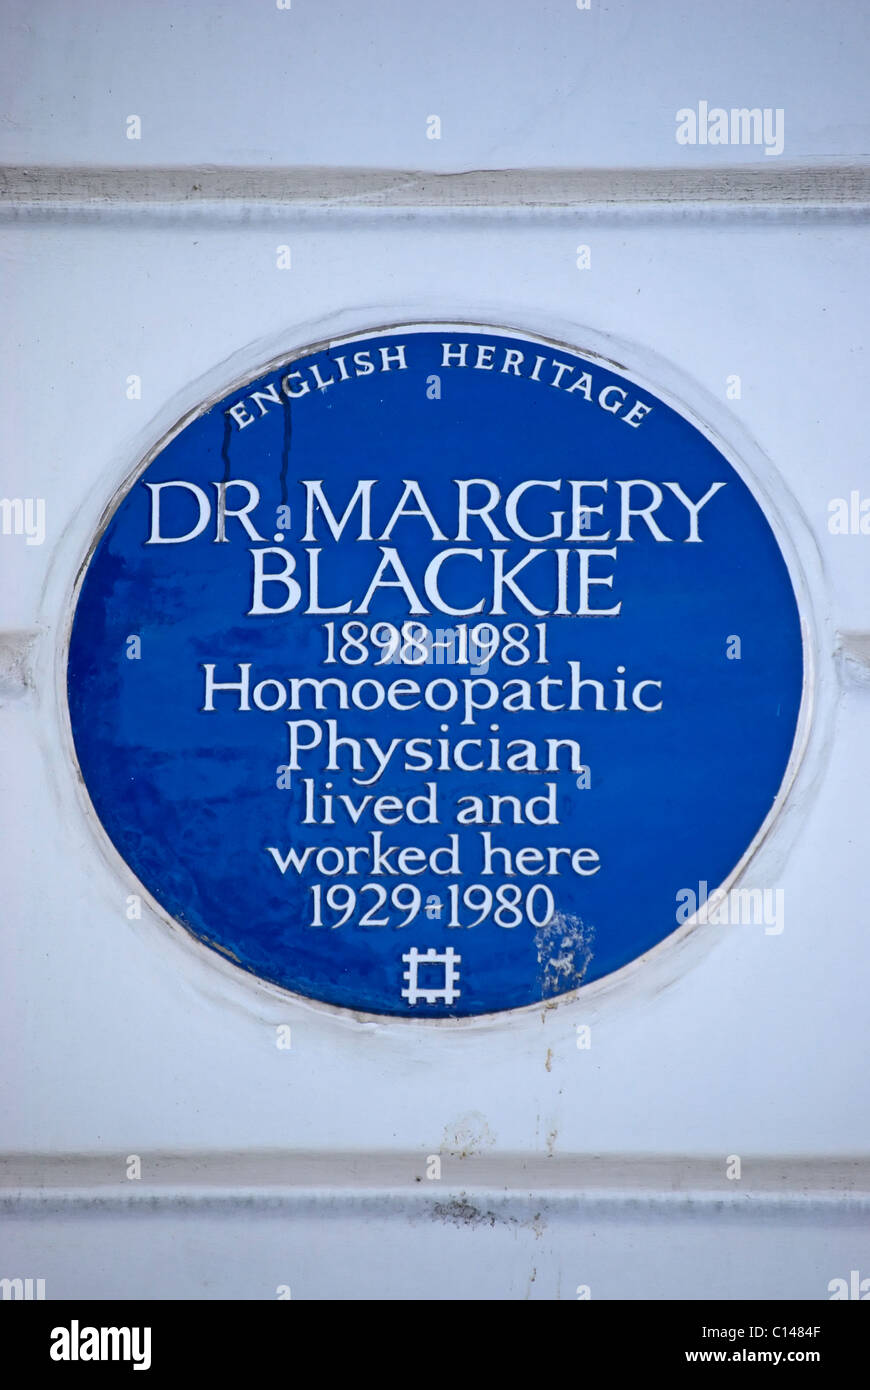 english heritage blue plaque marking a home of homeopathic doctor margery blackie, in south kensington, london, england Stock Photo